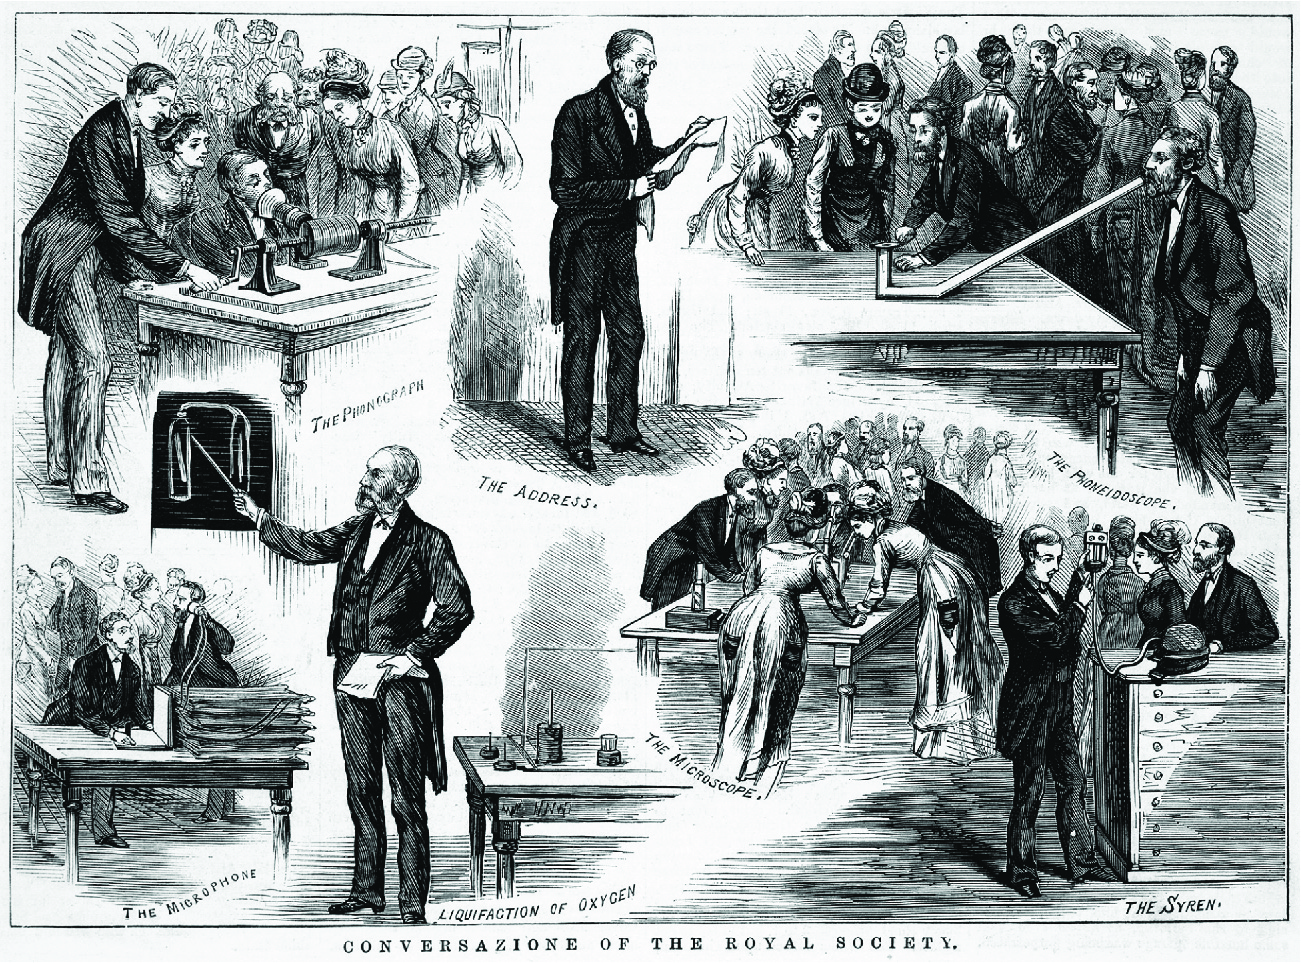 The black and white image includes seven different images shown in a collage. In the top left is a table with an early phonograph sitting on top. A man on the left in a suit and striped pants is turning a crank that leads to a long projection going through a barrel and leading to a tube. A man sitting at the table is talking into that tube. Behind him two ladies in dresses and a man in a suit with a large moustache are watching. People behind them are standing and watching what is happening. The image is labeled “the Phonograph.” In the middle top of the drawing a man in a dark suit, beard, and small round glasses is standing, reading from a long flowy piece of paper. The image is labeled “the Address.” In the top right a large table is shown with a “L’ shaped item with a long projection coming out of the bottom of the “L.” A man with a beard dressed in a black suit stands at the end of that projection and talks into it. Two women in dresses and large hats and a man with a beard and suit stand at the top of the “L” item listening. In the background behind them twelve men and women in dresses, suits, and hats stand around talking to each other. The drawing is labeled “The Phoneidoscope.” In the bottom right, a tall cabinet with drawers is shown. At the left stands a man in a dark suit holding a rectangular shaped item with lines and circle on it. It has a tube attached to the bottom that runs to an oval shaped object sitting on the cabinet. A man with a beard in a dark suit and a woman in a dress and a large feathery hat stand behind the cabinet looking at the man. Two people are shown standing in the background. The image is labeled “The Syren.” In the middle bottom of the drawing a large rectangular table is shown with three primitive microscopes. Three women in long dresses and large feathery hats lean over the table, observing what is happening. Two men in dark suits lean over and table and one man sits at the far end looking into a microscope. Many people are in the background talking to each other. Under the drawing are the words “The Microscope.” To the left of that scene a man is drawn with a moustache and beard, wearing a dark suit. He holds a stick in his right hand that is pointing to a drawing of two glass bottle connected with a tube at the top. He is holding a paper in his left hand. Behind him is a table with various circular items on it and under the table are the words “Liquifaction of Oxygen.” The drawing in the bottom left shows a man in a black suit sitting at a table holding an open book. The table has five stacked flat rectangular objects on it with two wires running from their top to a circular container another man holds to his left ear. He is standing next to the seated man. Behind them five men and women stand around and talk with each other. The words “The Microphone” are written under the table. The words “Conversazione of the Royal Society.” run along the bottom of the drawing.